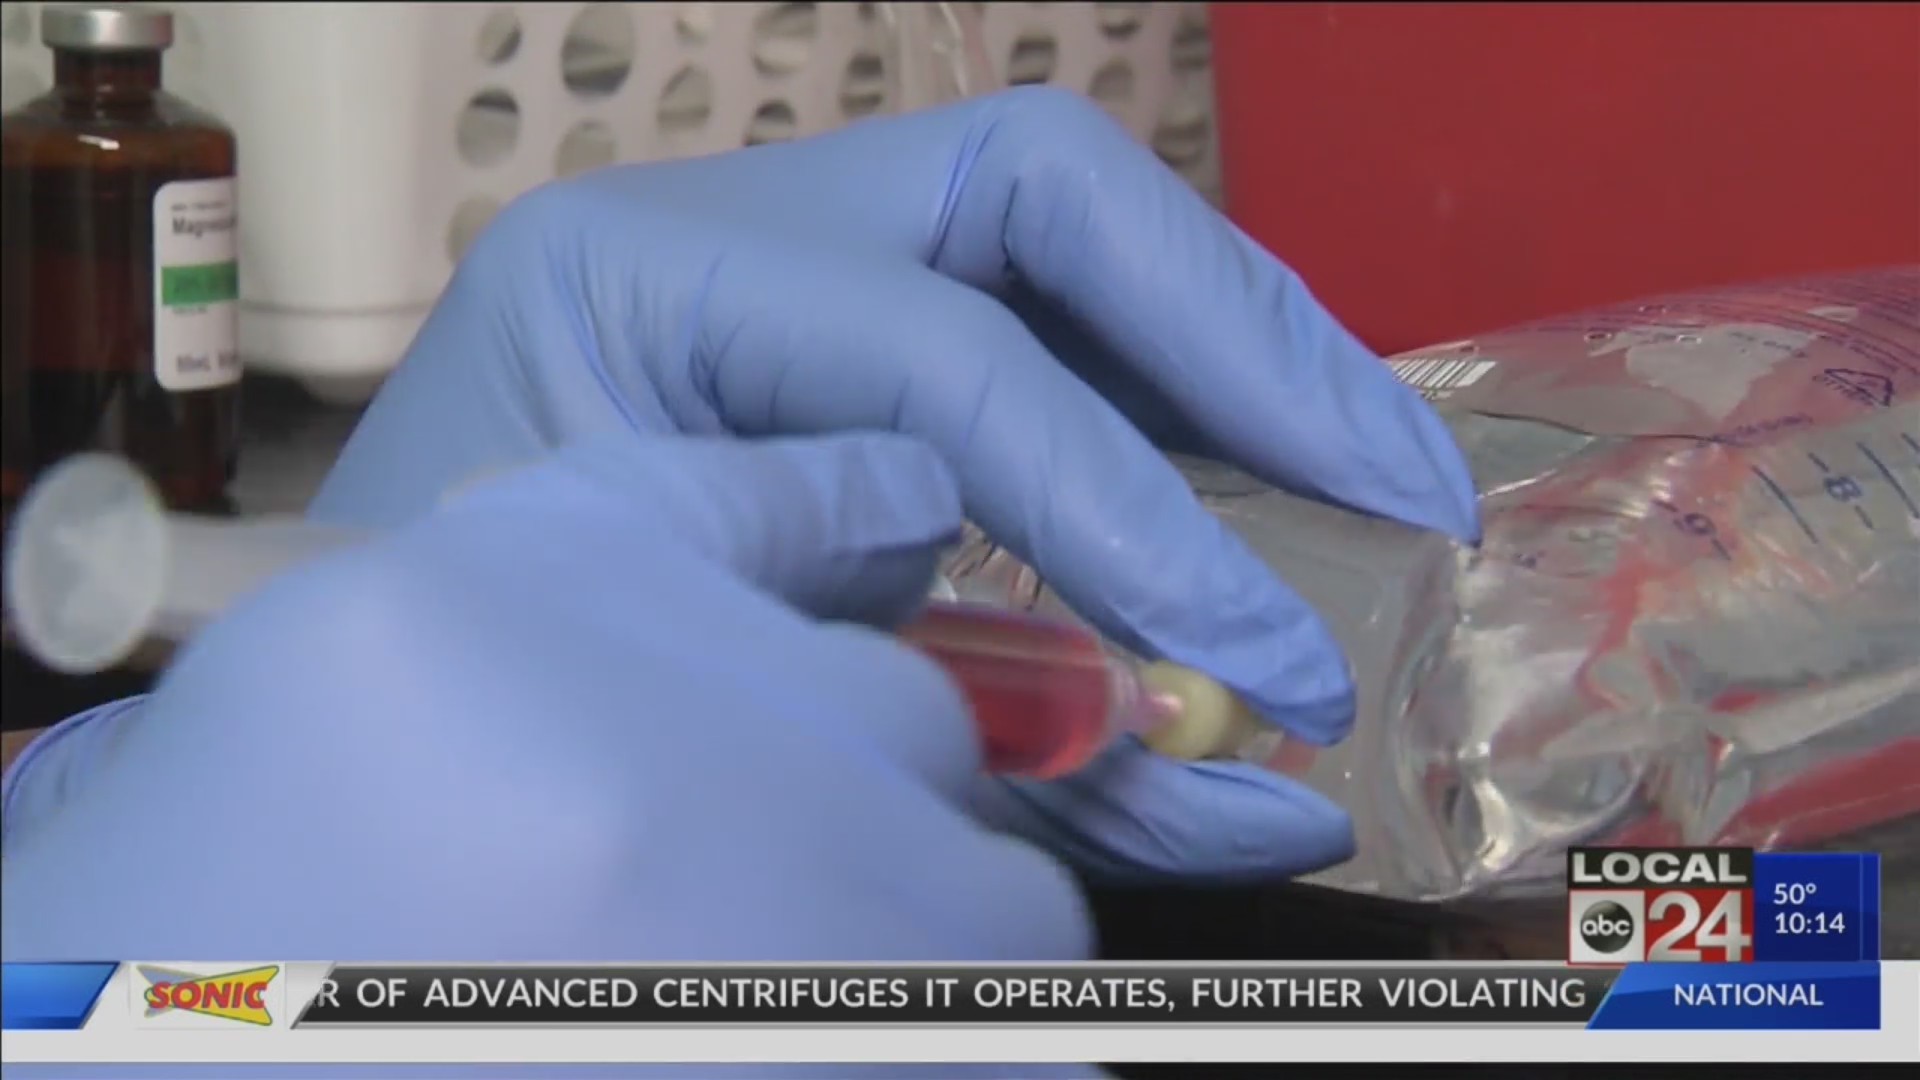 Is IV hydration therapy safe? The Local I-Team investigates